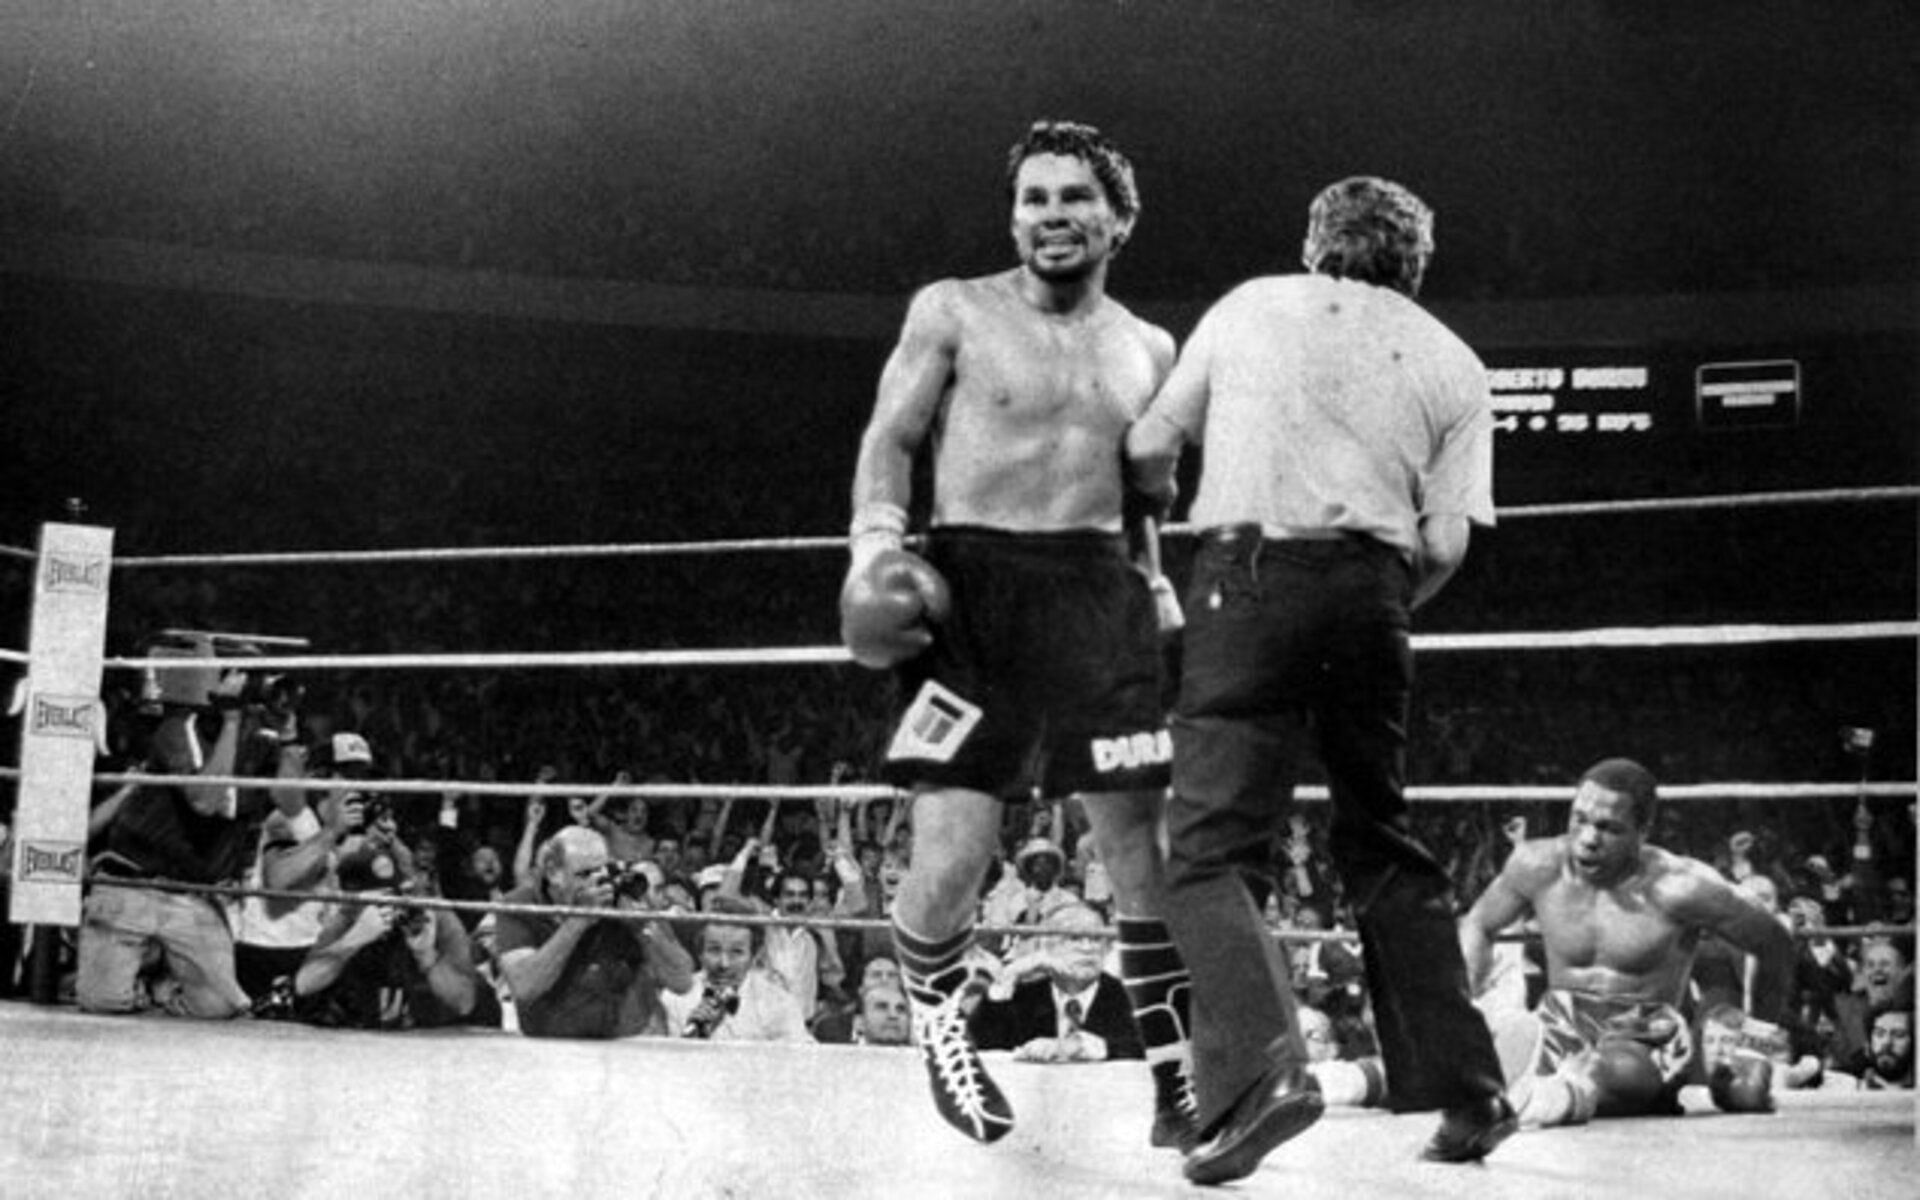 Roberto Duran knocked out Davey Moore on this day in 1983. [Image via @BoxingHistoria on Twitter]